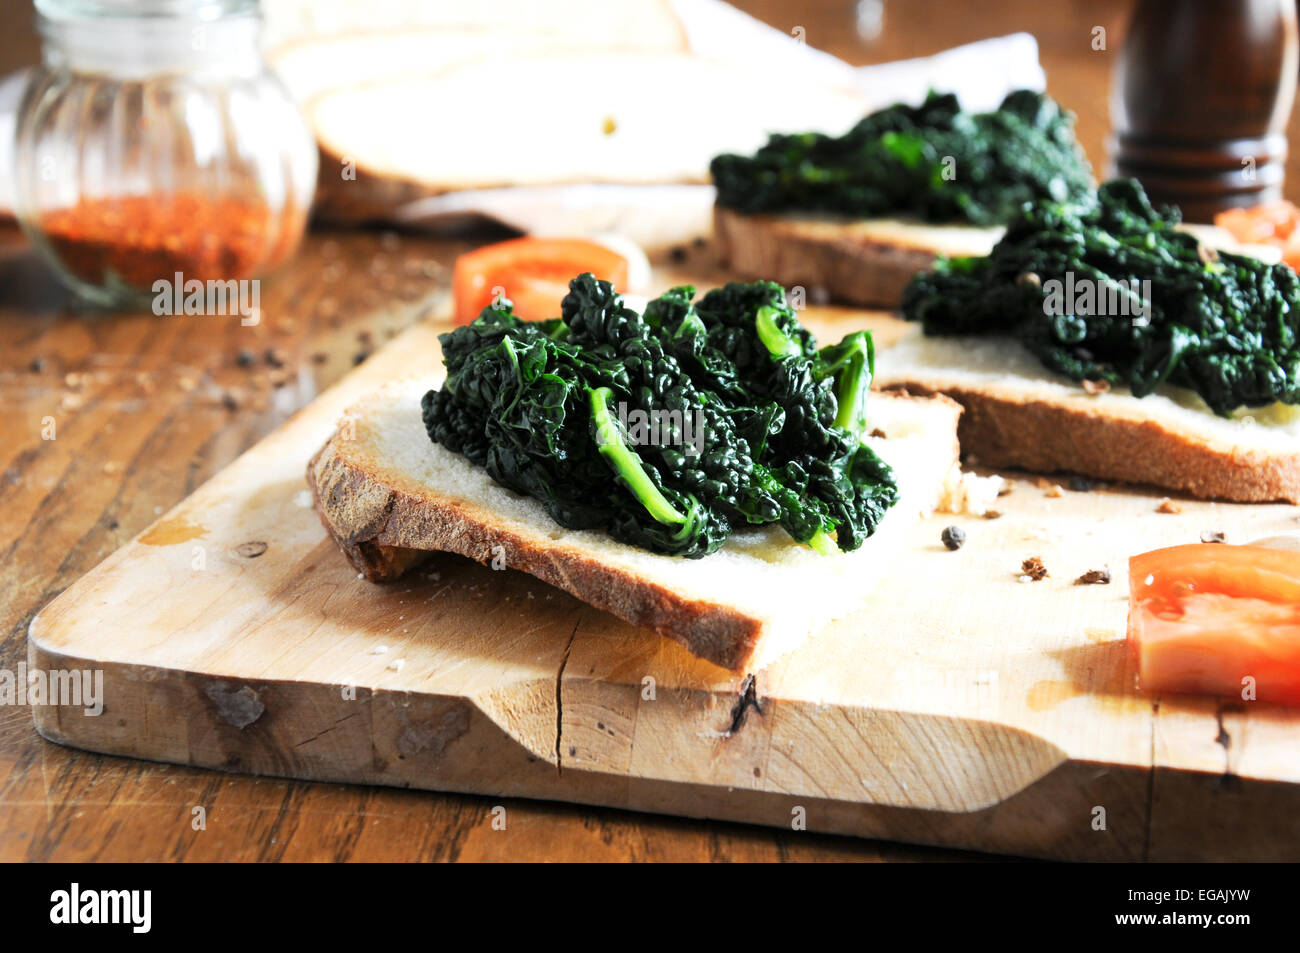 Canapè with black cabbage Stock Photo